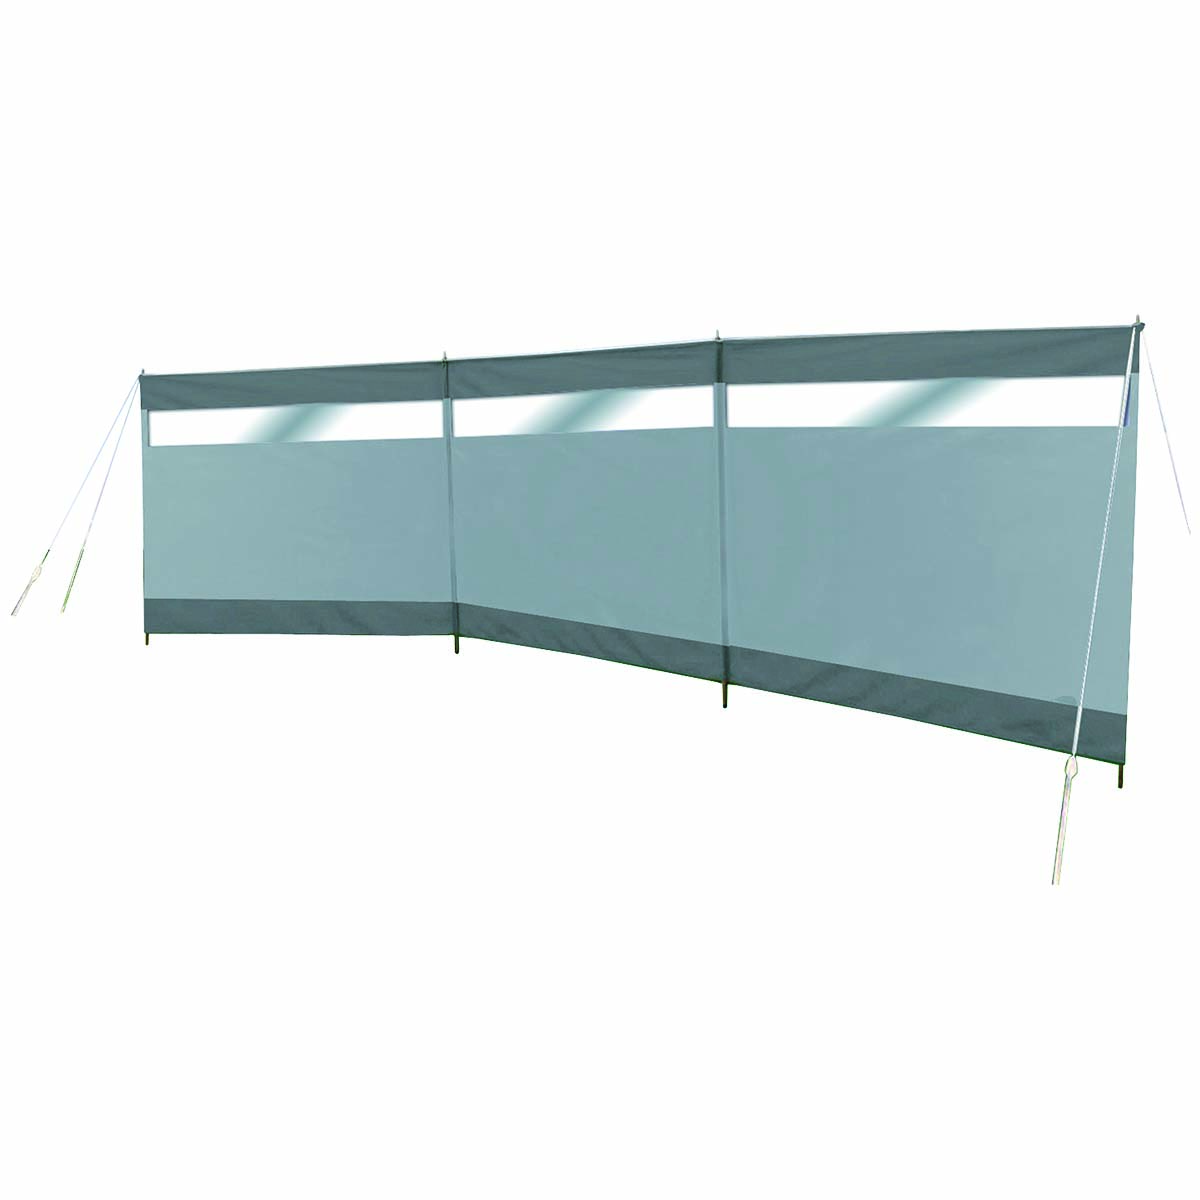 4367643 Extra sold and weather proof 3 part wind screen. This wind screen is extra solid due the UV-resistant coating and the thicker canvas, which also ensures added stability. The wind screen also has top beams and a sturdy PVC frame. Ideal against the wind, the sun or to keep things out of sight. Because the windscreen consists of 3 compartments the angle can be adjusted to any situation. The screen has a modern look. Supplied with a carry bag, guy ropes and thicker pegs.